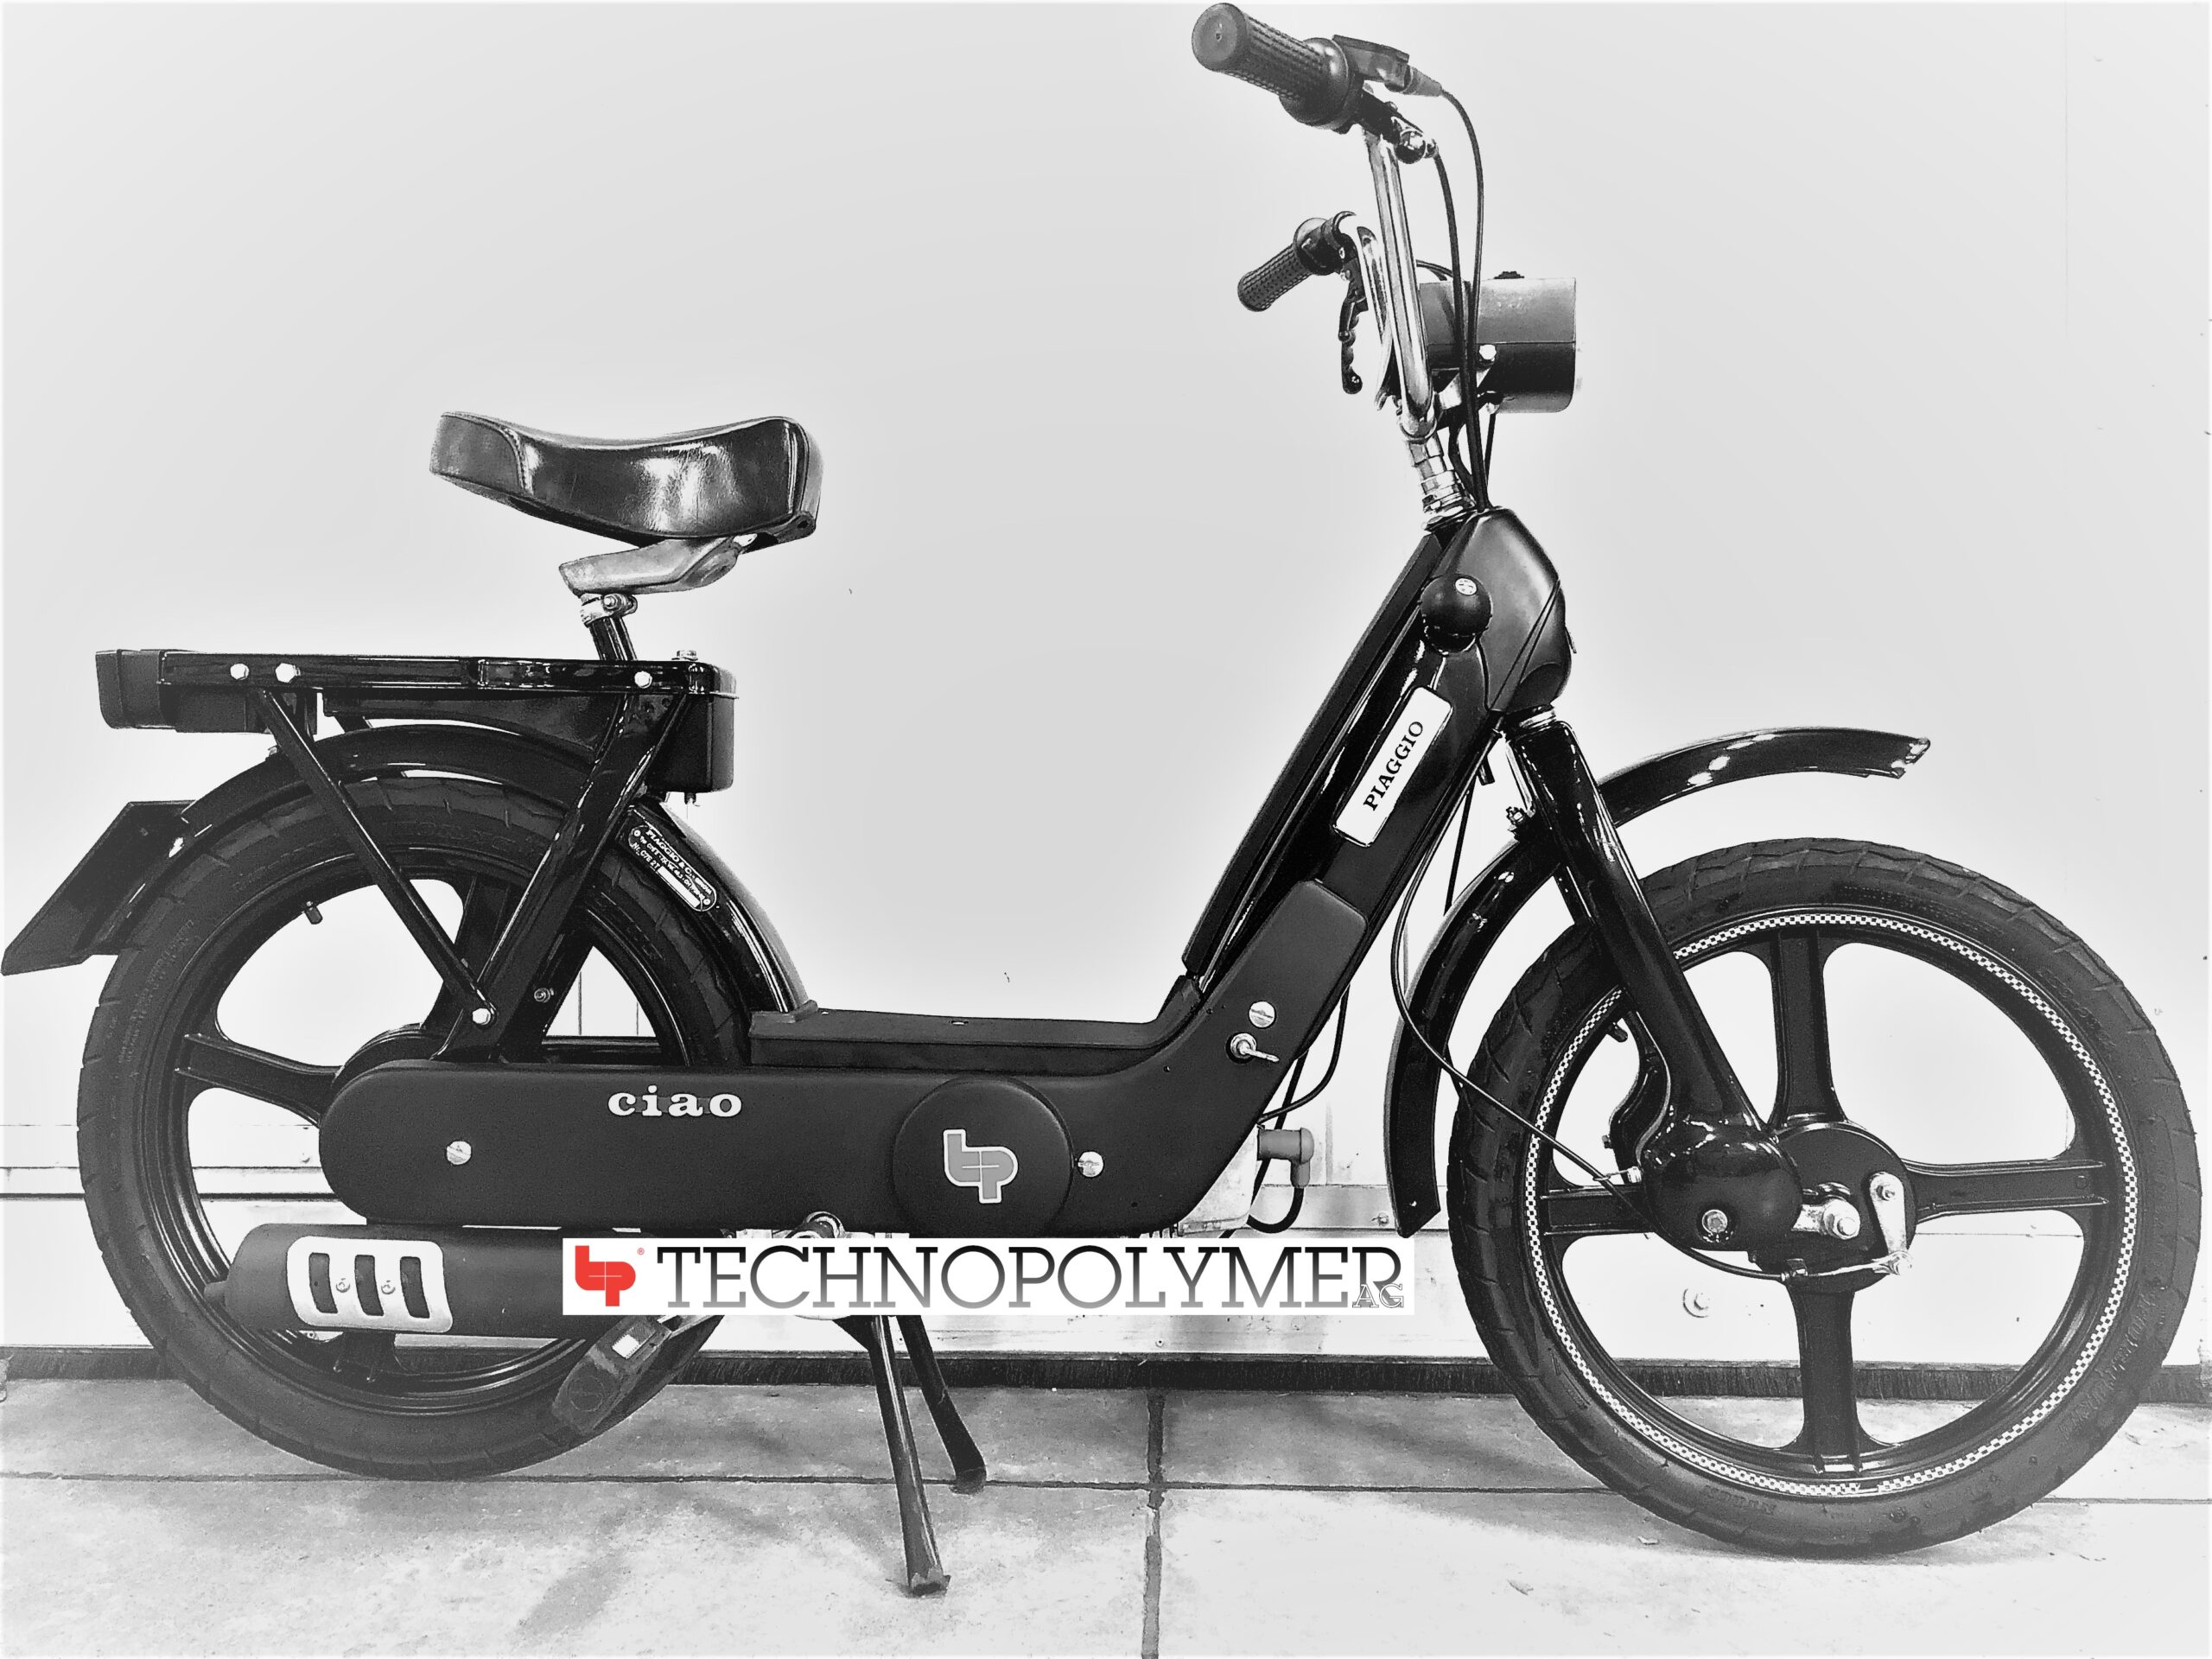 https://technopolymer.ch/wp-content/uploads/2021/01/CIAO-PIAGGIO-PX-TP-scaled.jpg